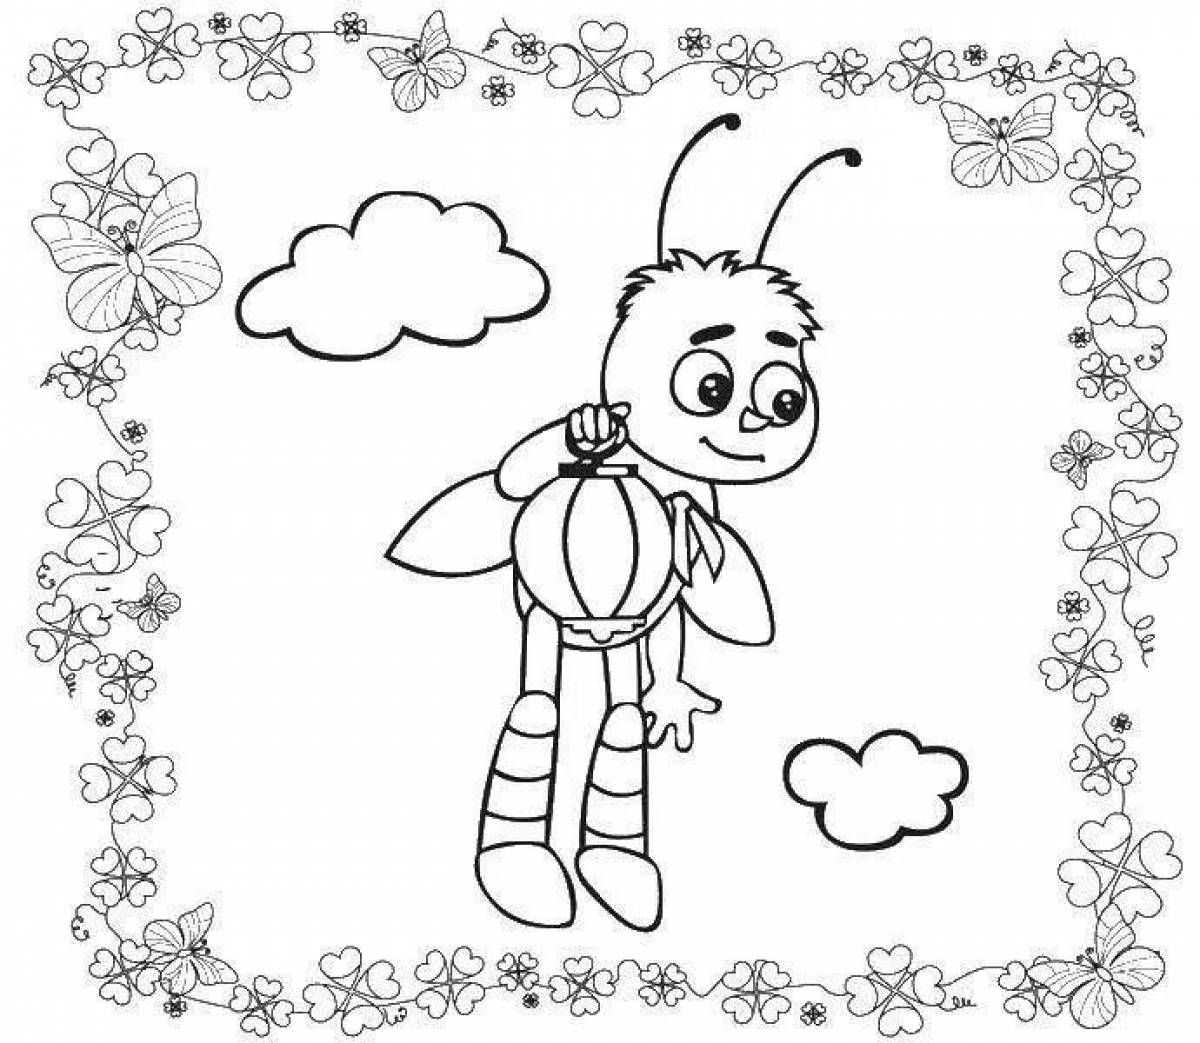 Adorable little bees coloring pages